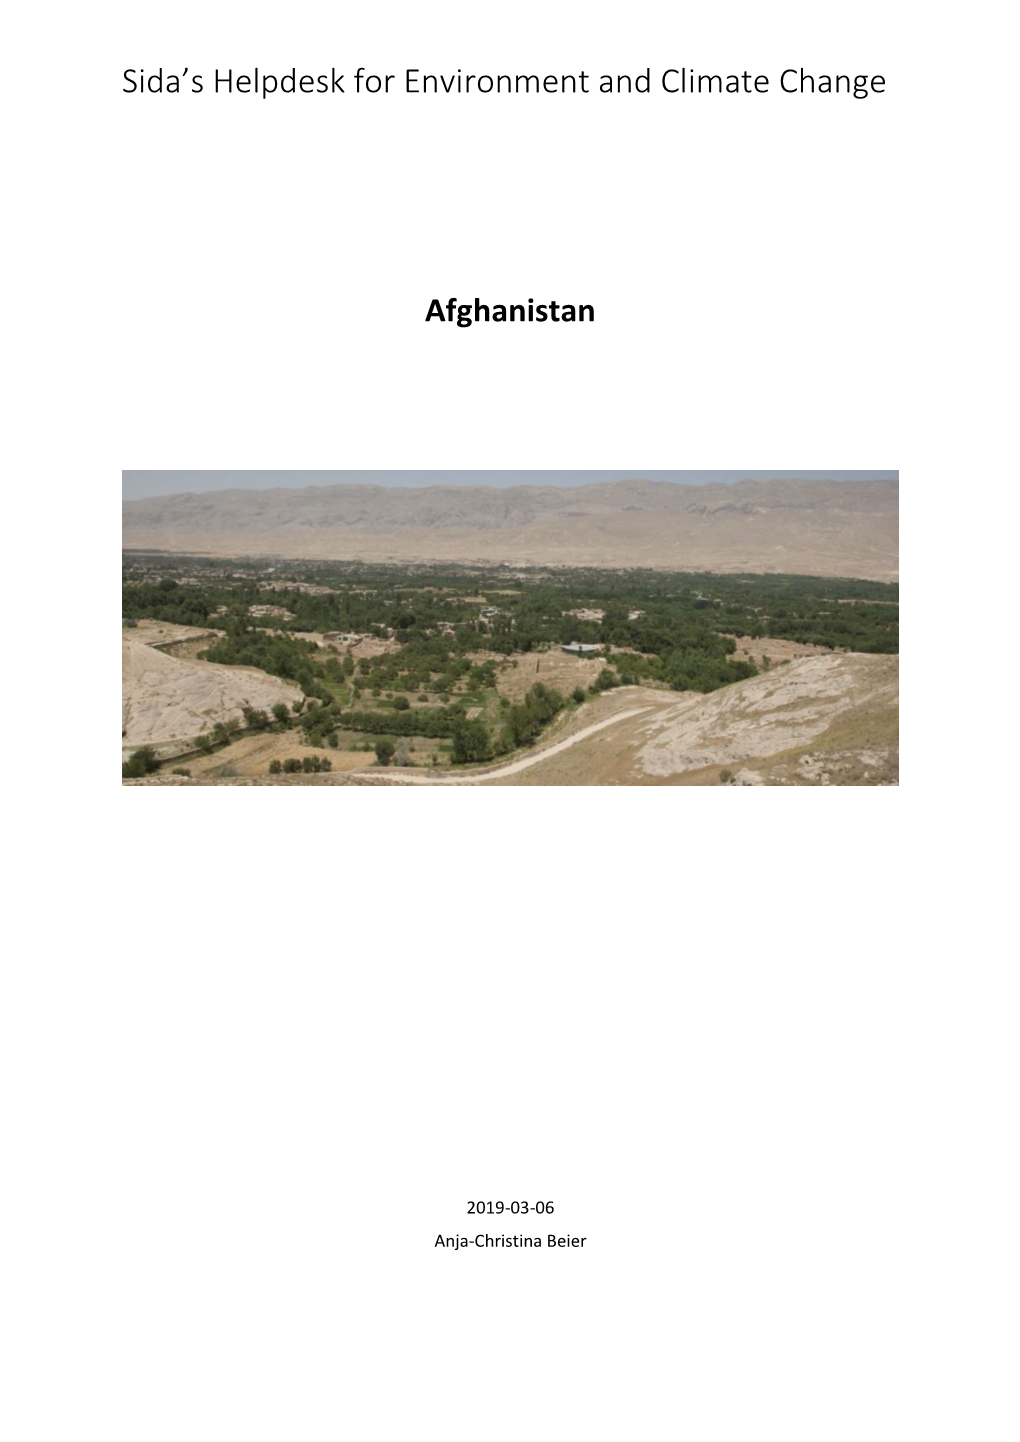 Afghanistan Environmental Overview 190306